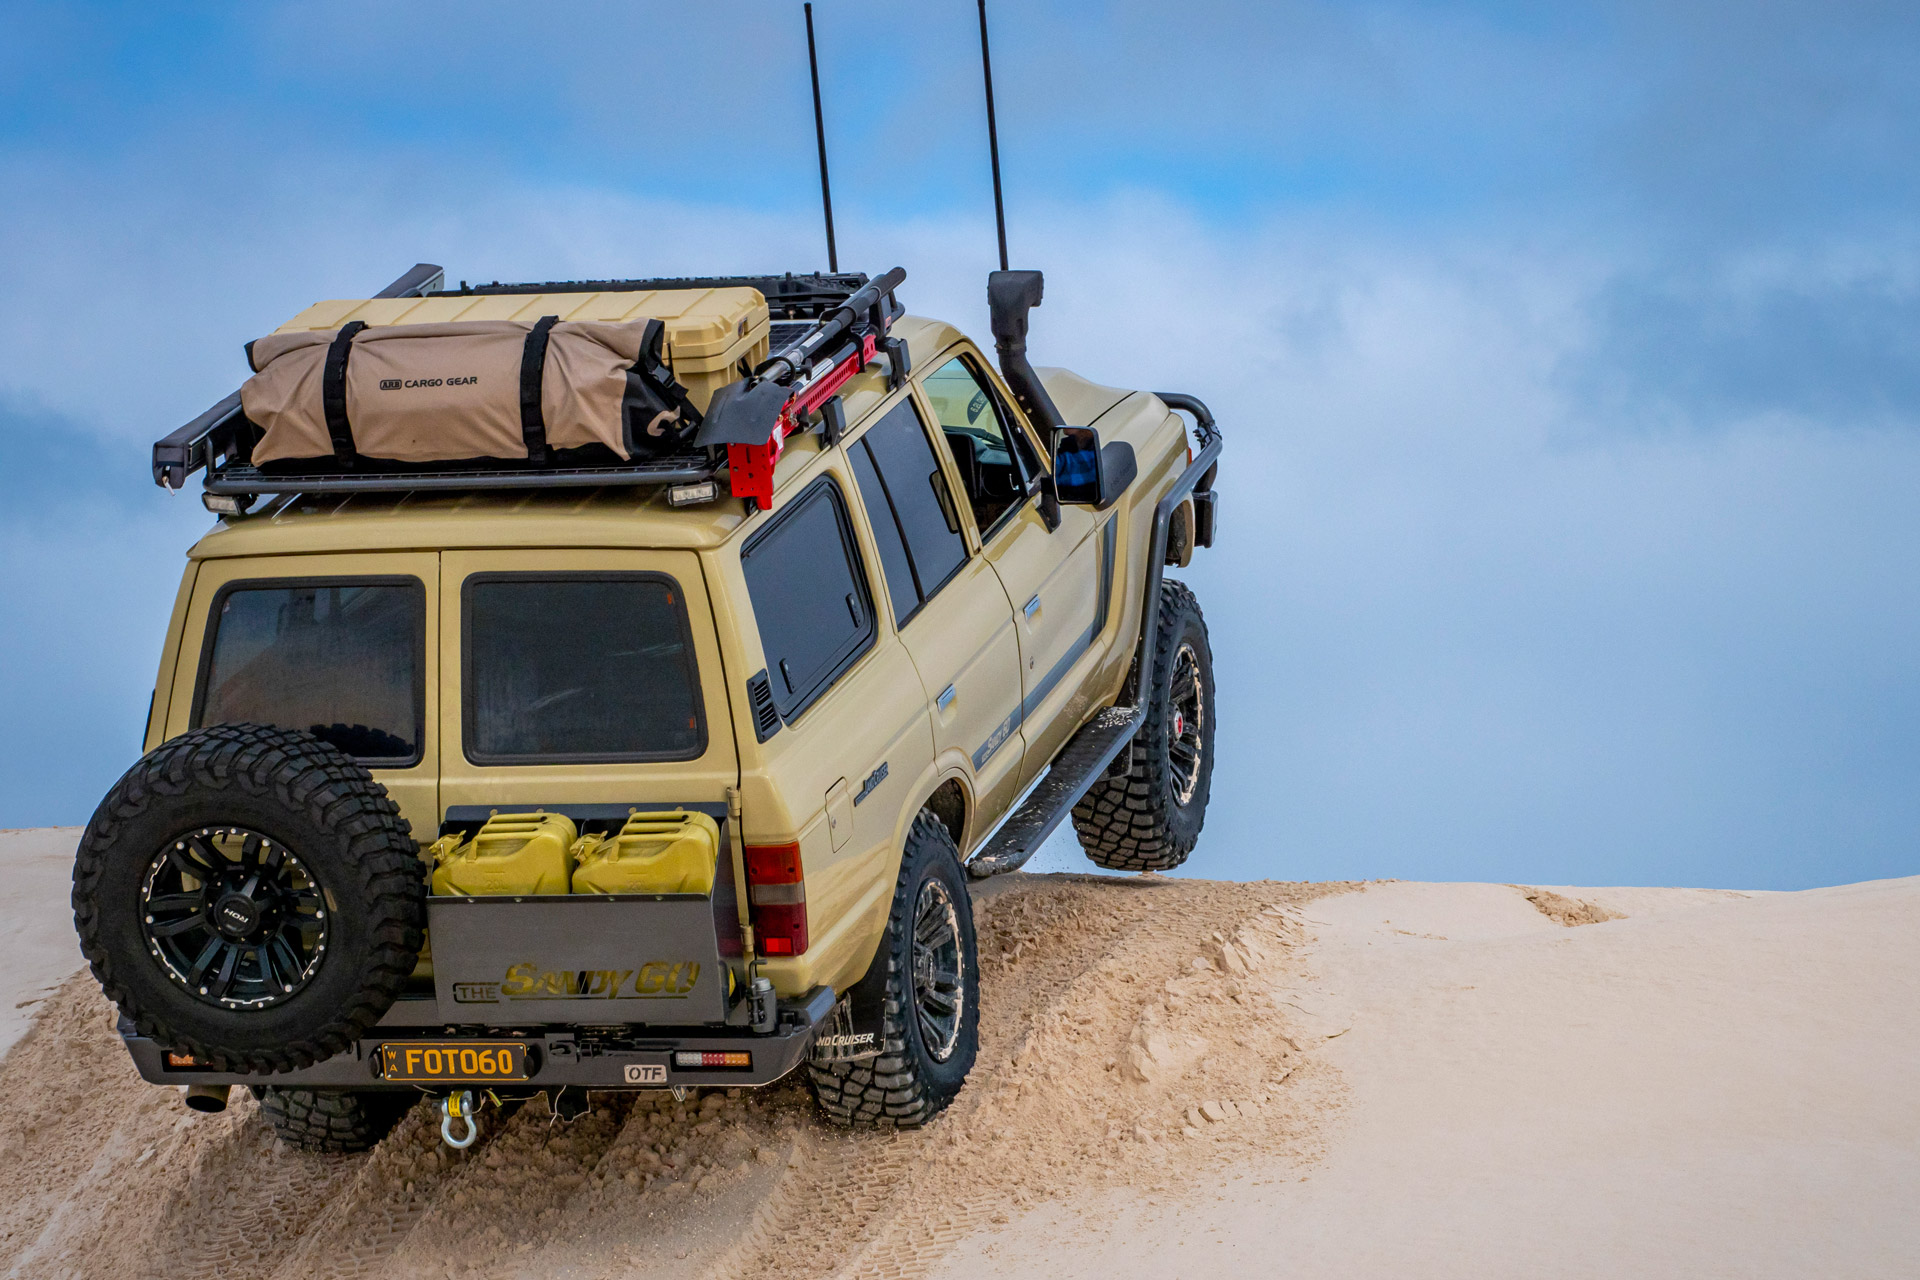 ROH Vapour wheels on Sandy 60 Series LandCruiser on the beach getting airborne